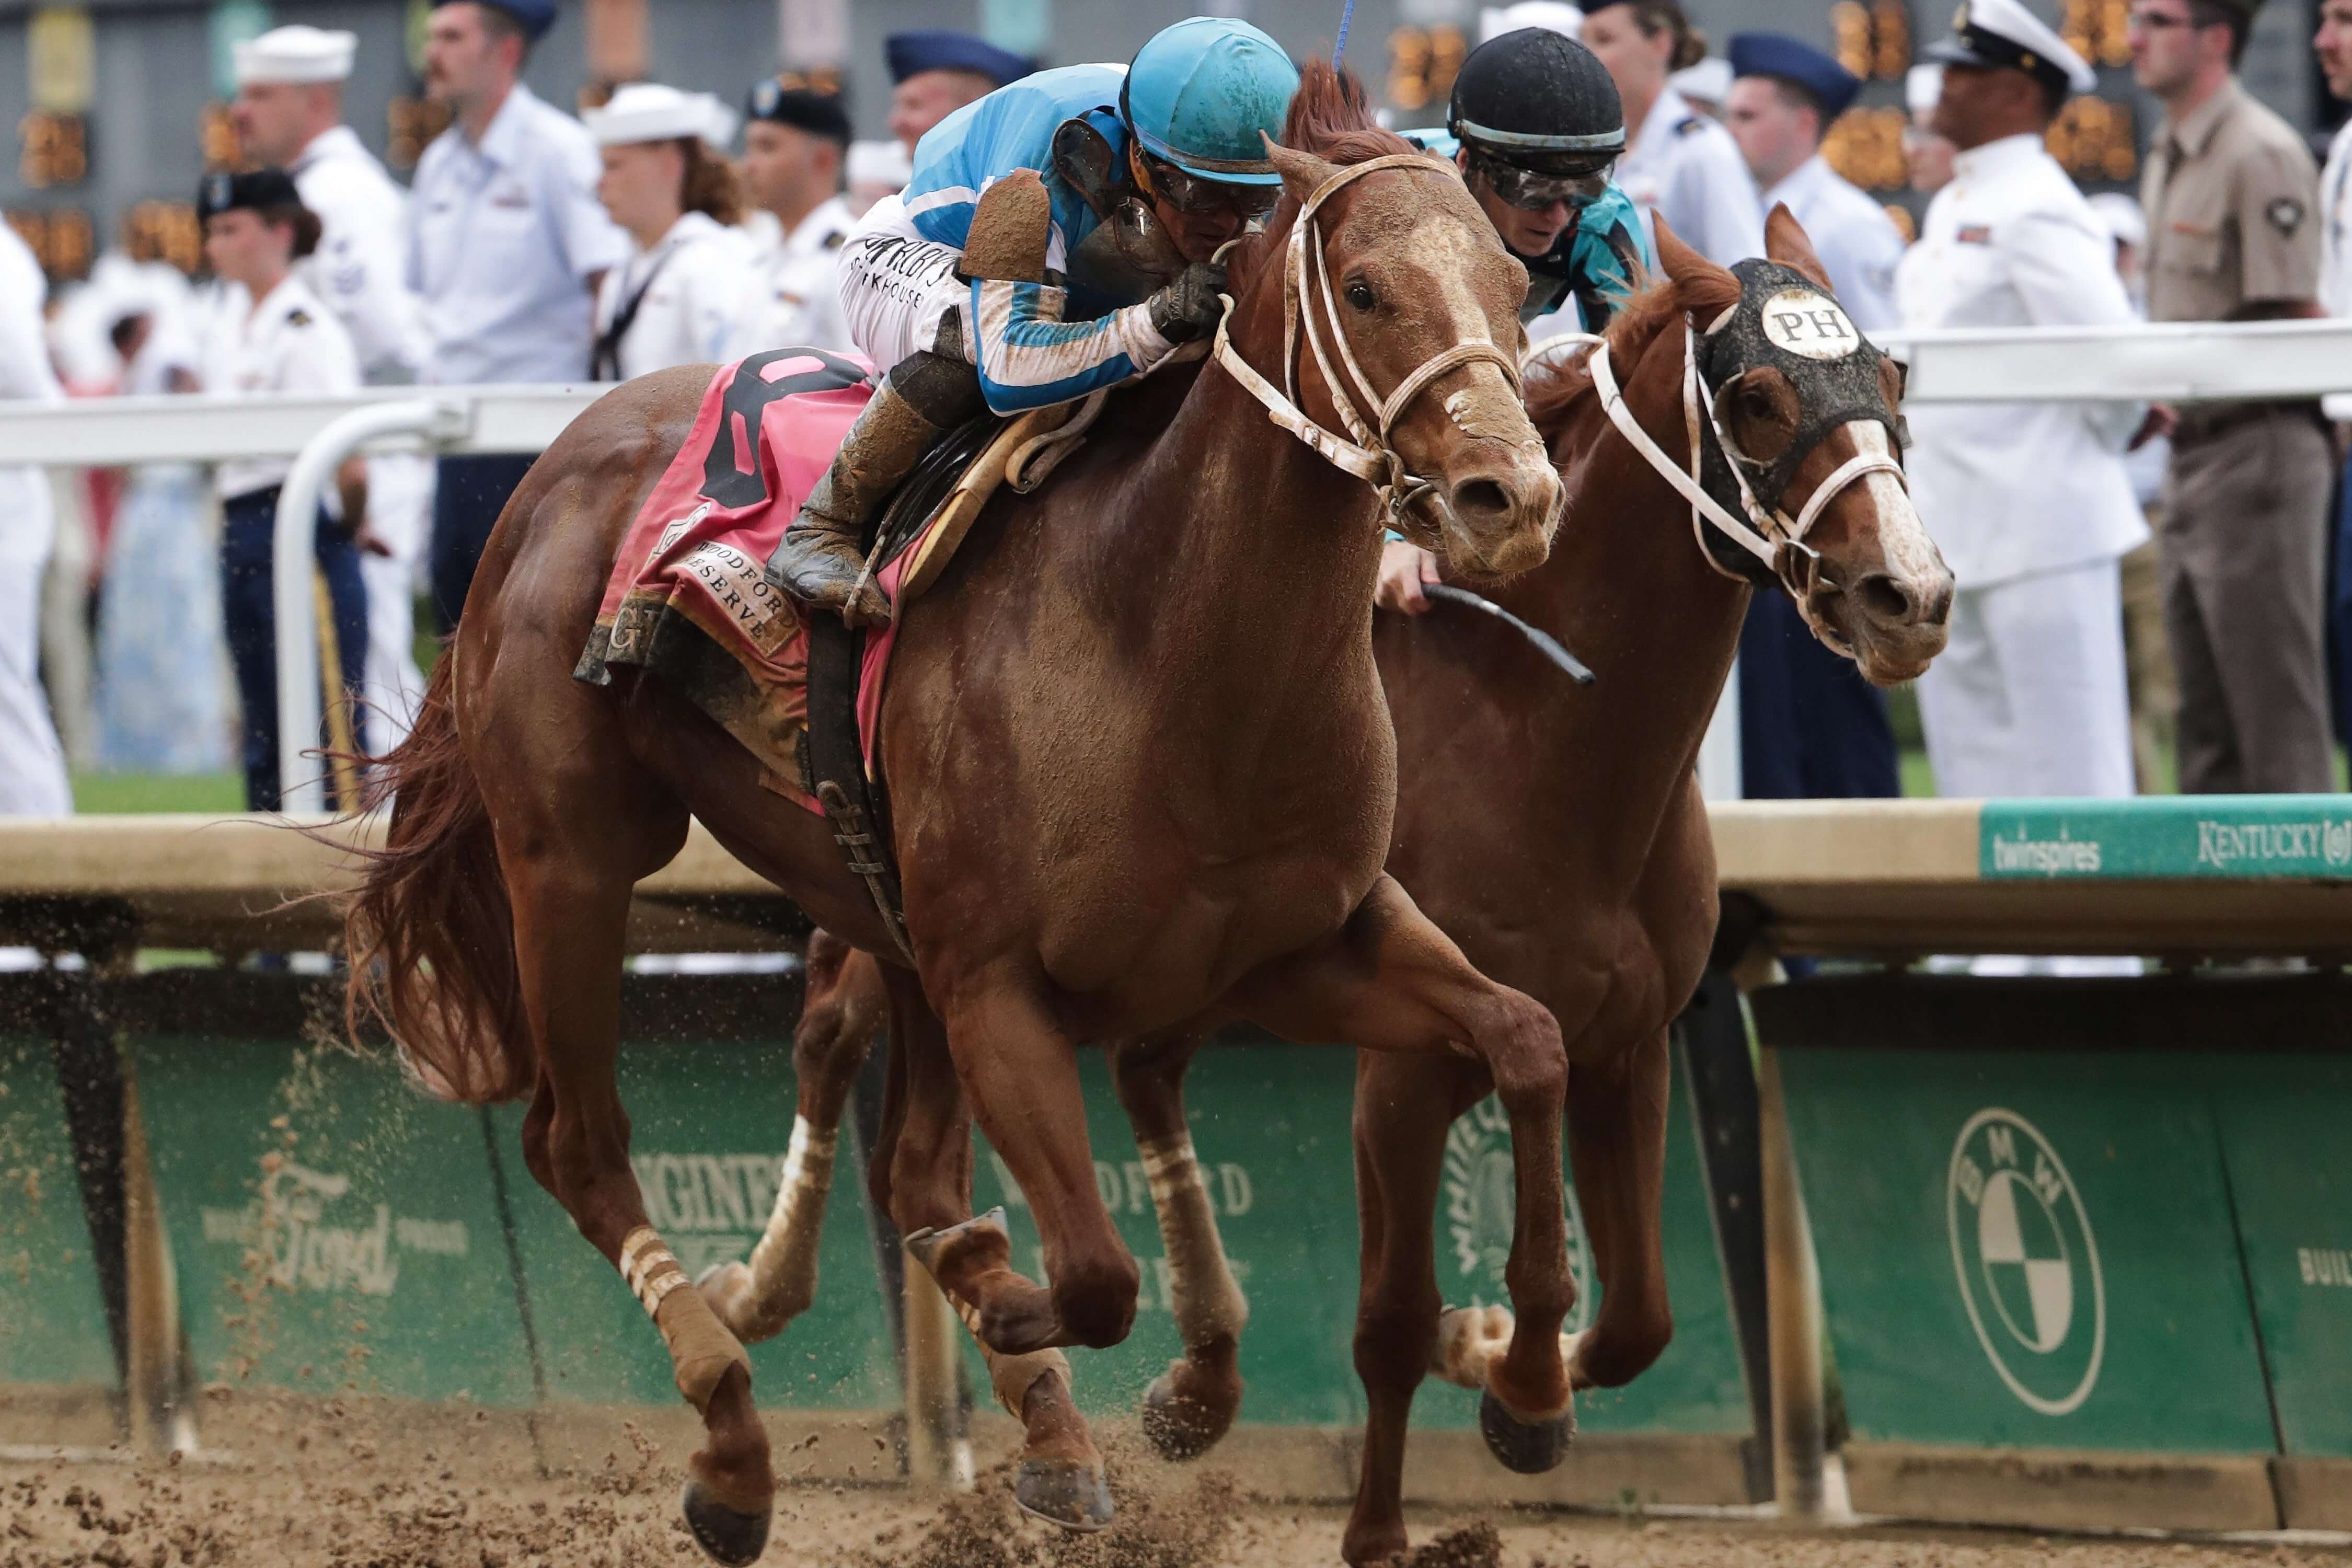 How To Bet - Horse Racing Picks, Odds, and Best Bets for August 26: Can Mage Take Travers Stakes?